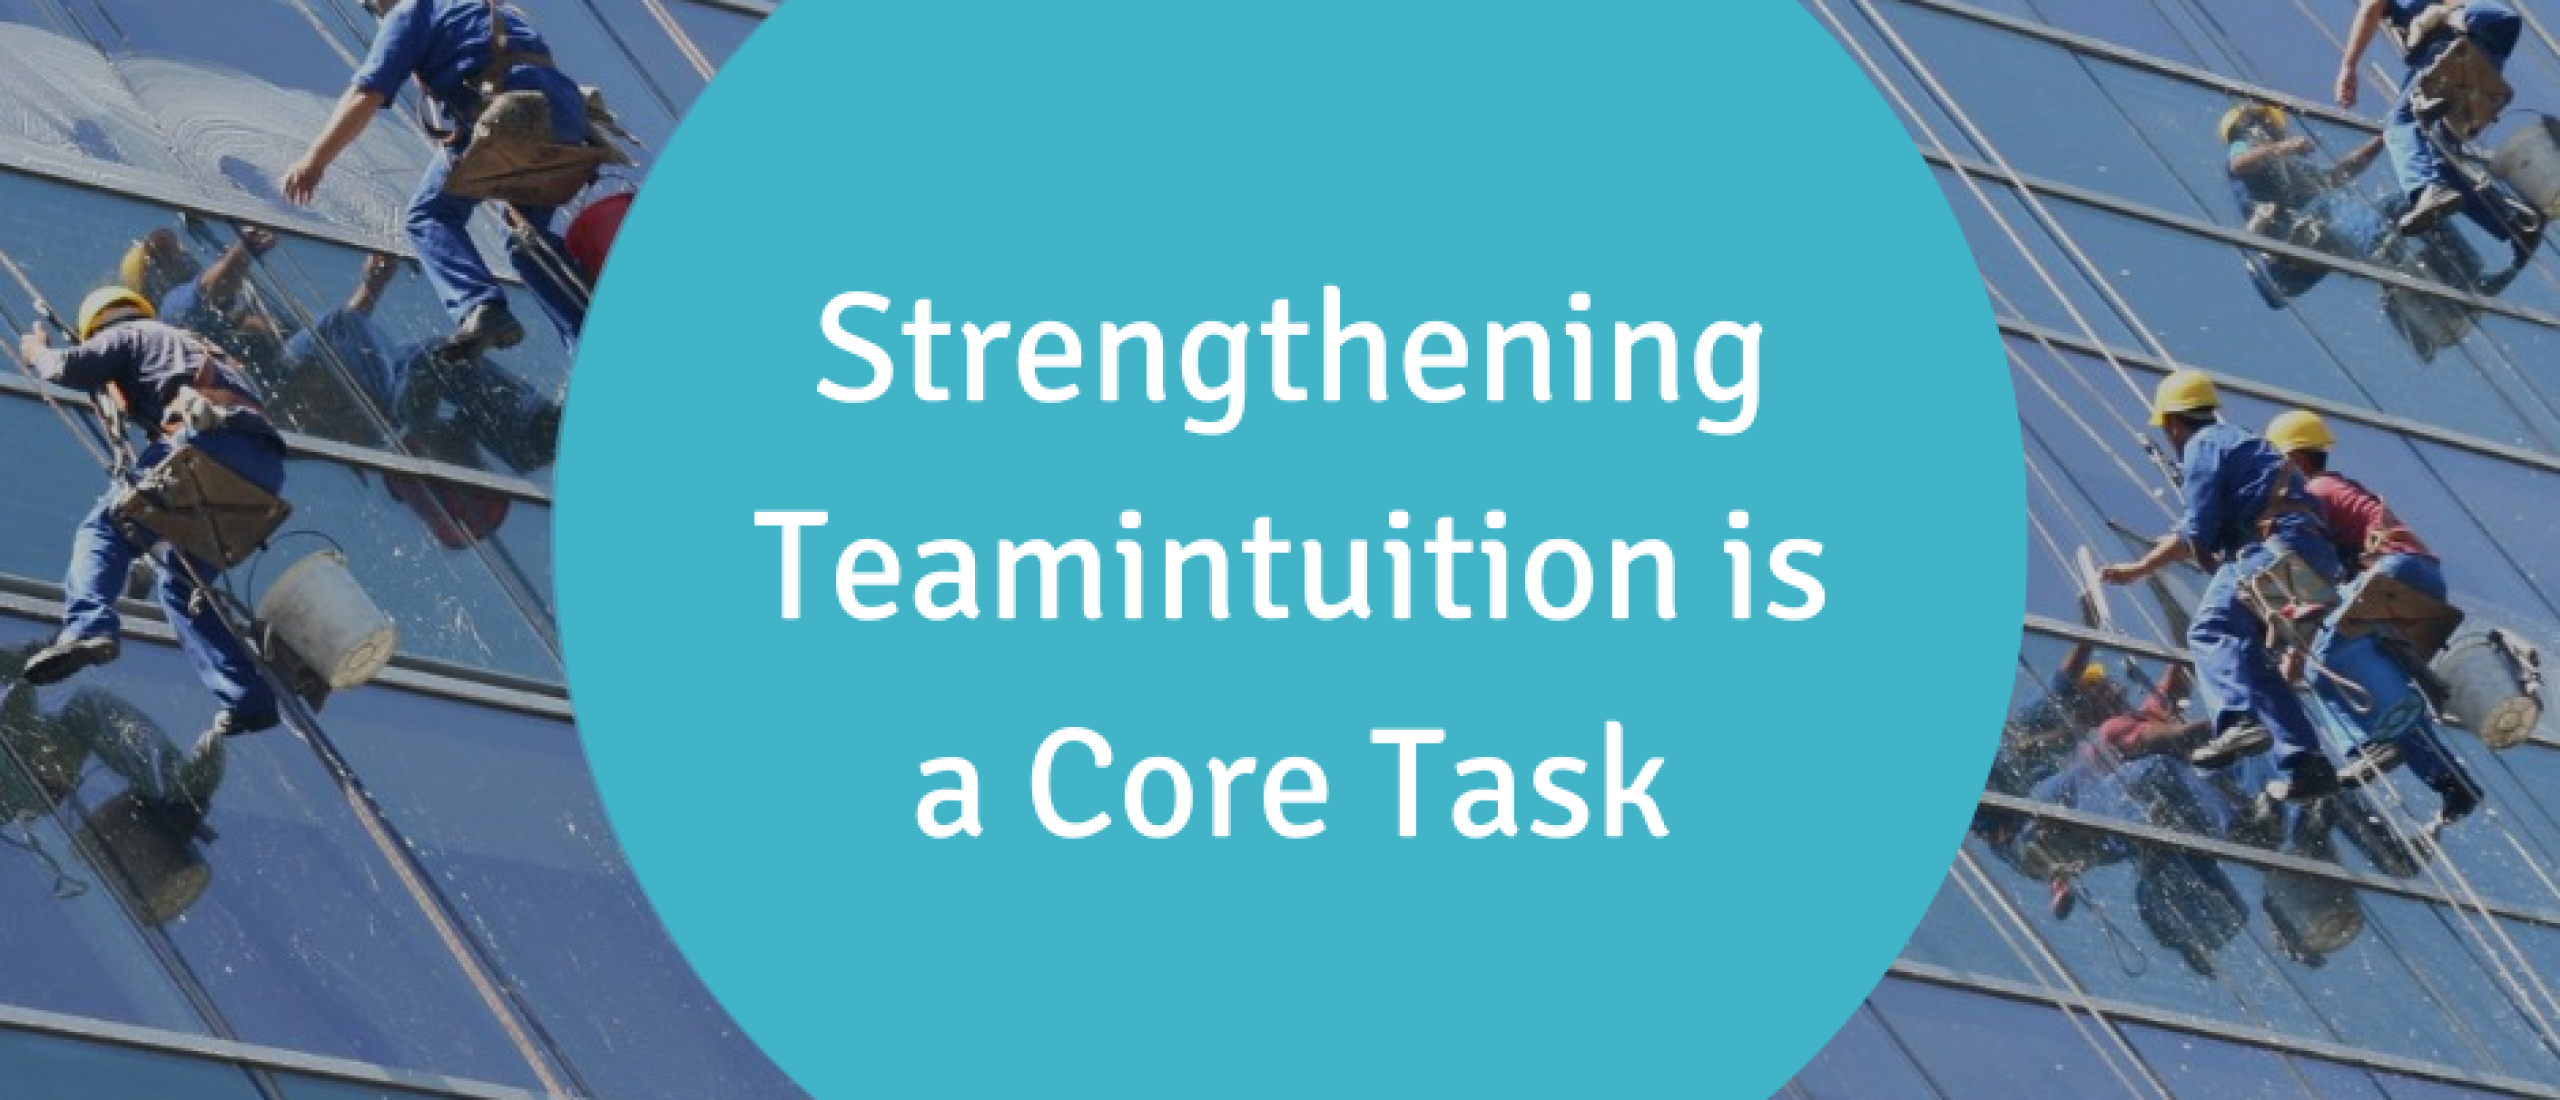 Strengthening Teamintuition is a Core Task